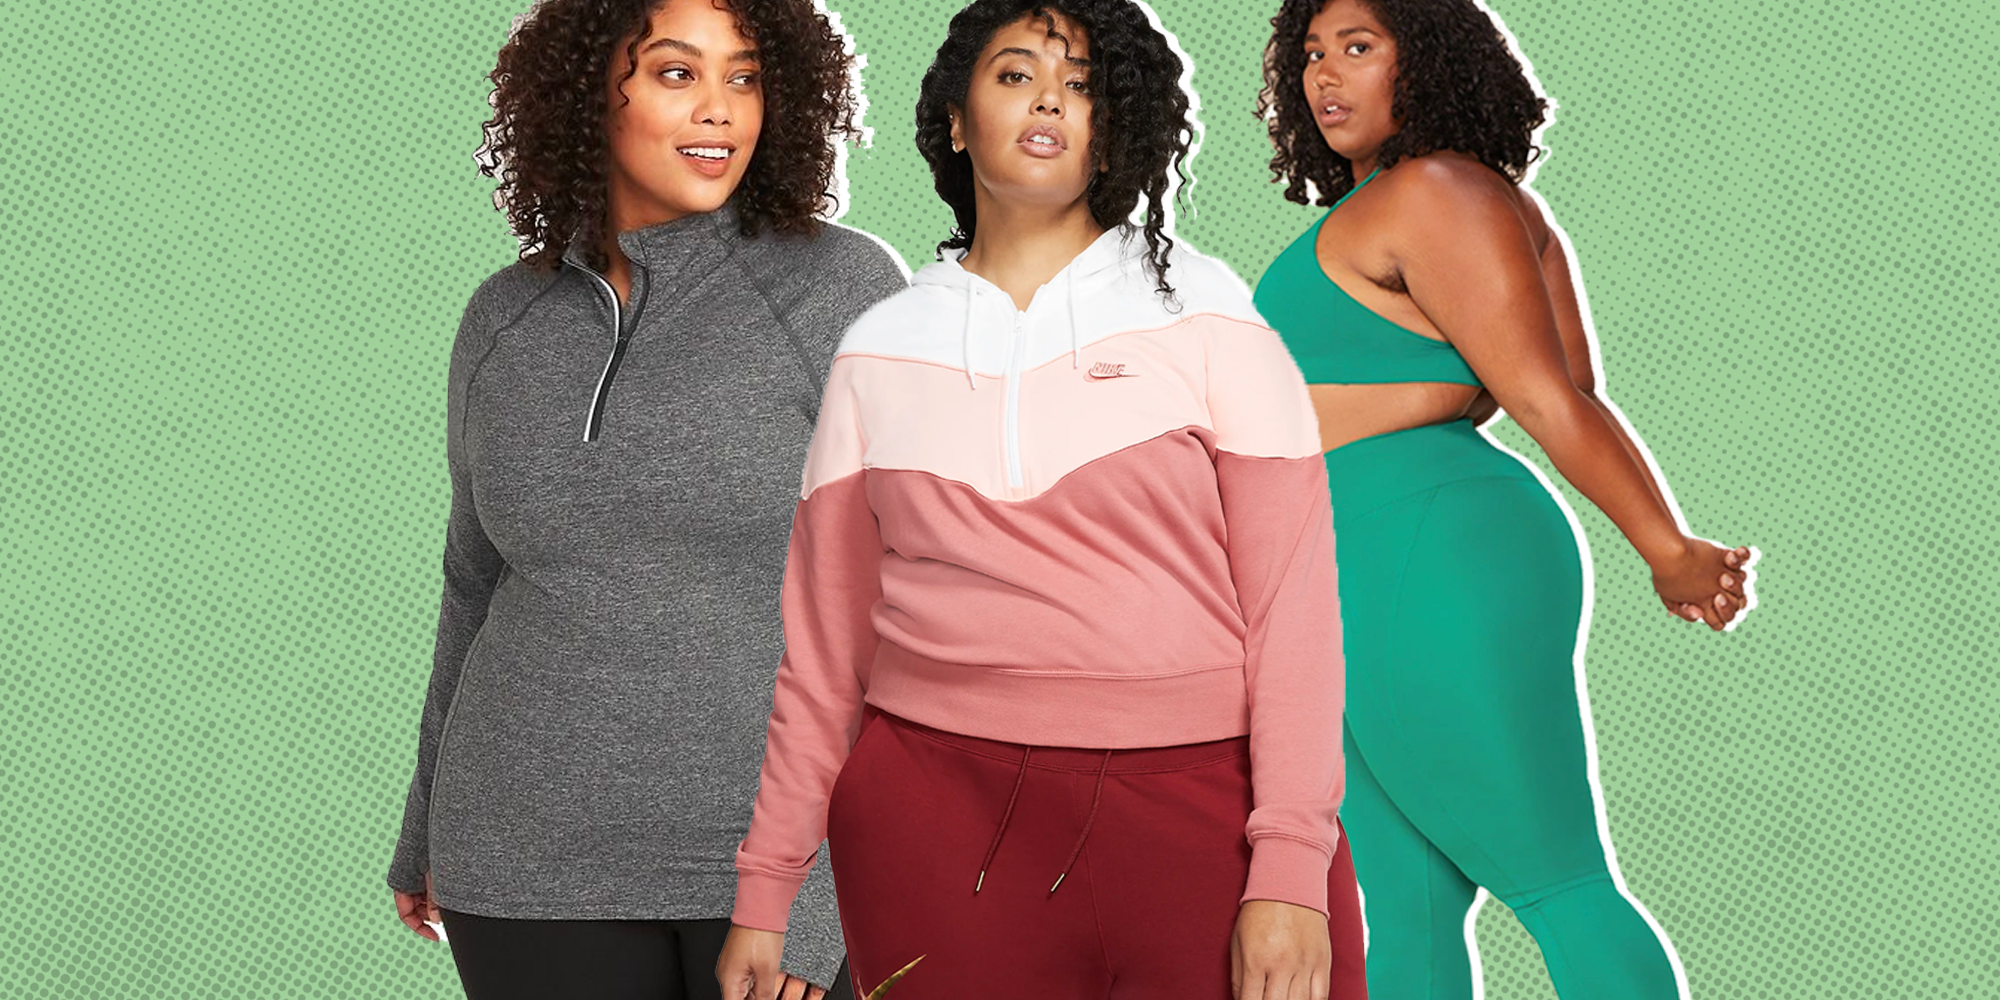 I Tried Six Pairs Of Plus-Size Workout Leggings To Find The Best Ones